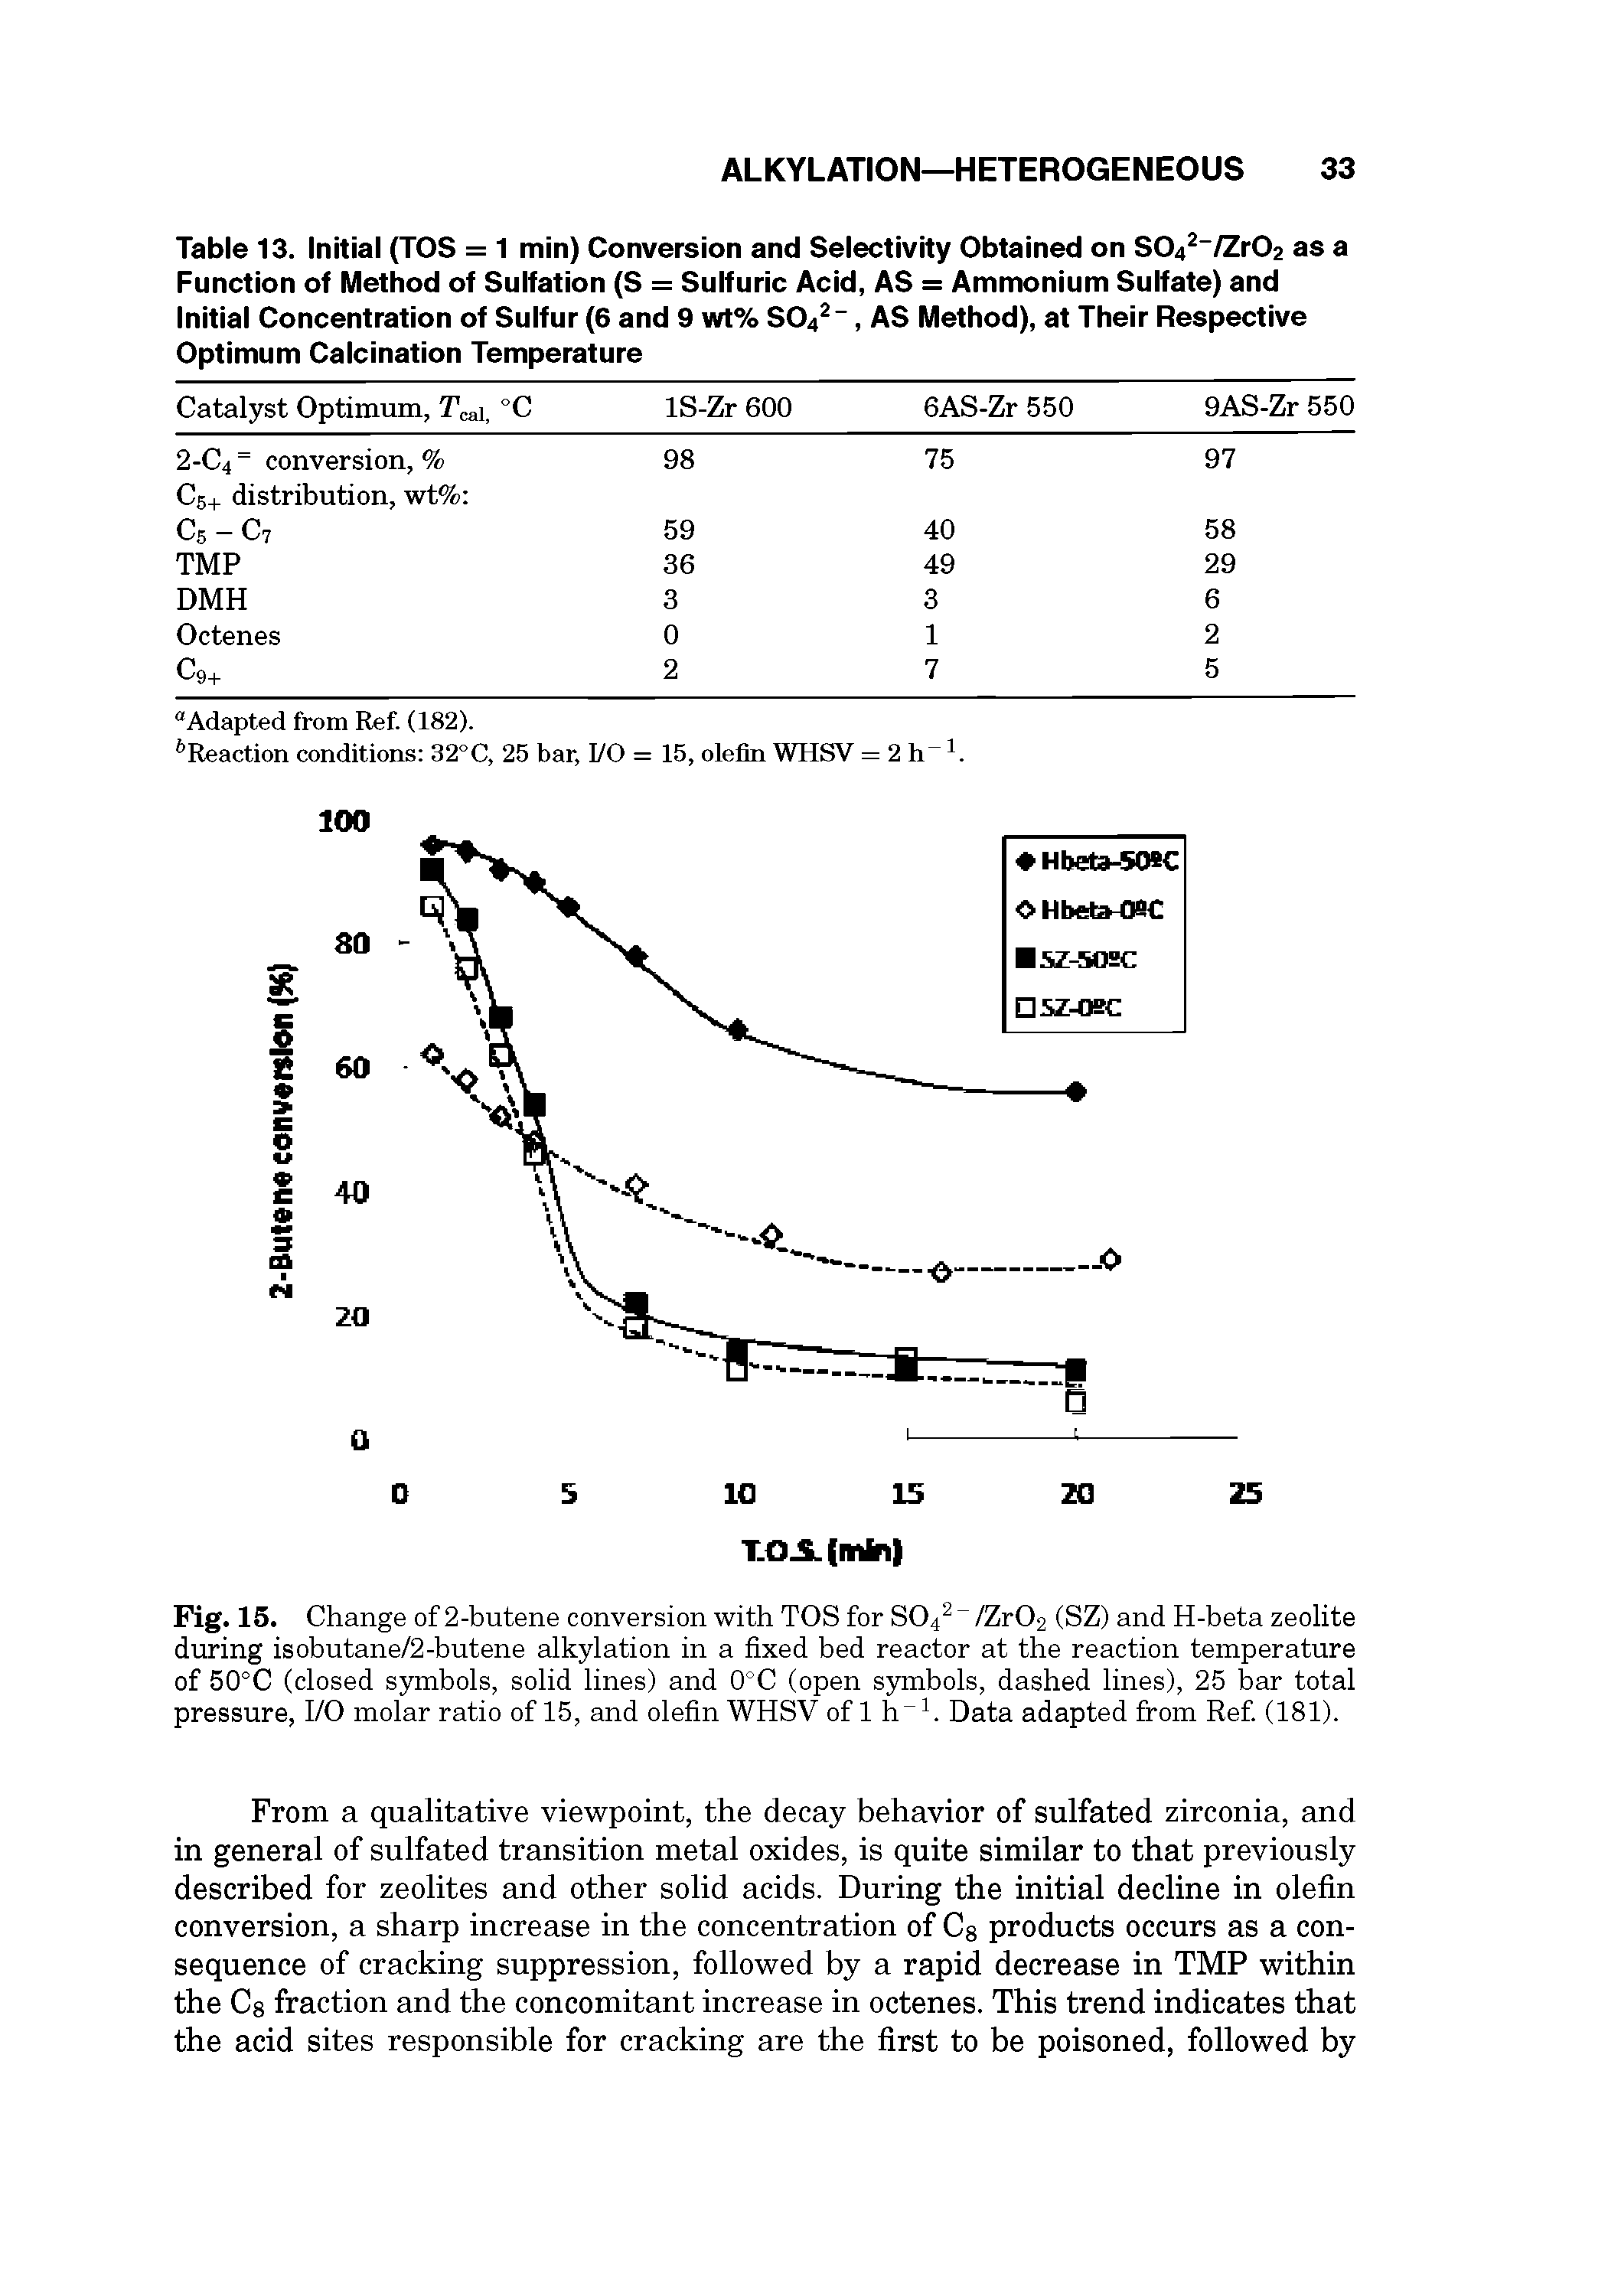 Table 13. Initial (TOS = 1 min) Conversion and Selectivity Obtained on S04 /Zr02 as a Function of Method of Sulfation (S = Sulfuric Acid, AS = Ammonium Sulfate) and Initial Concentration of Sulfur (6 and 9 wt% S04 , AS Method), at Their Respective Optimum Calcination Temperature...